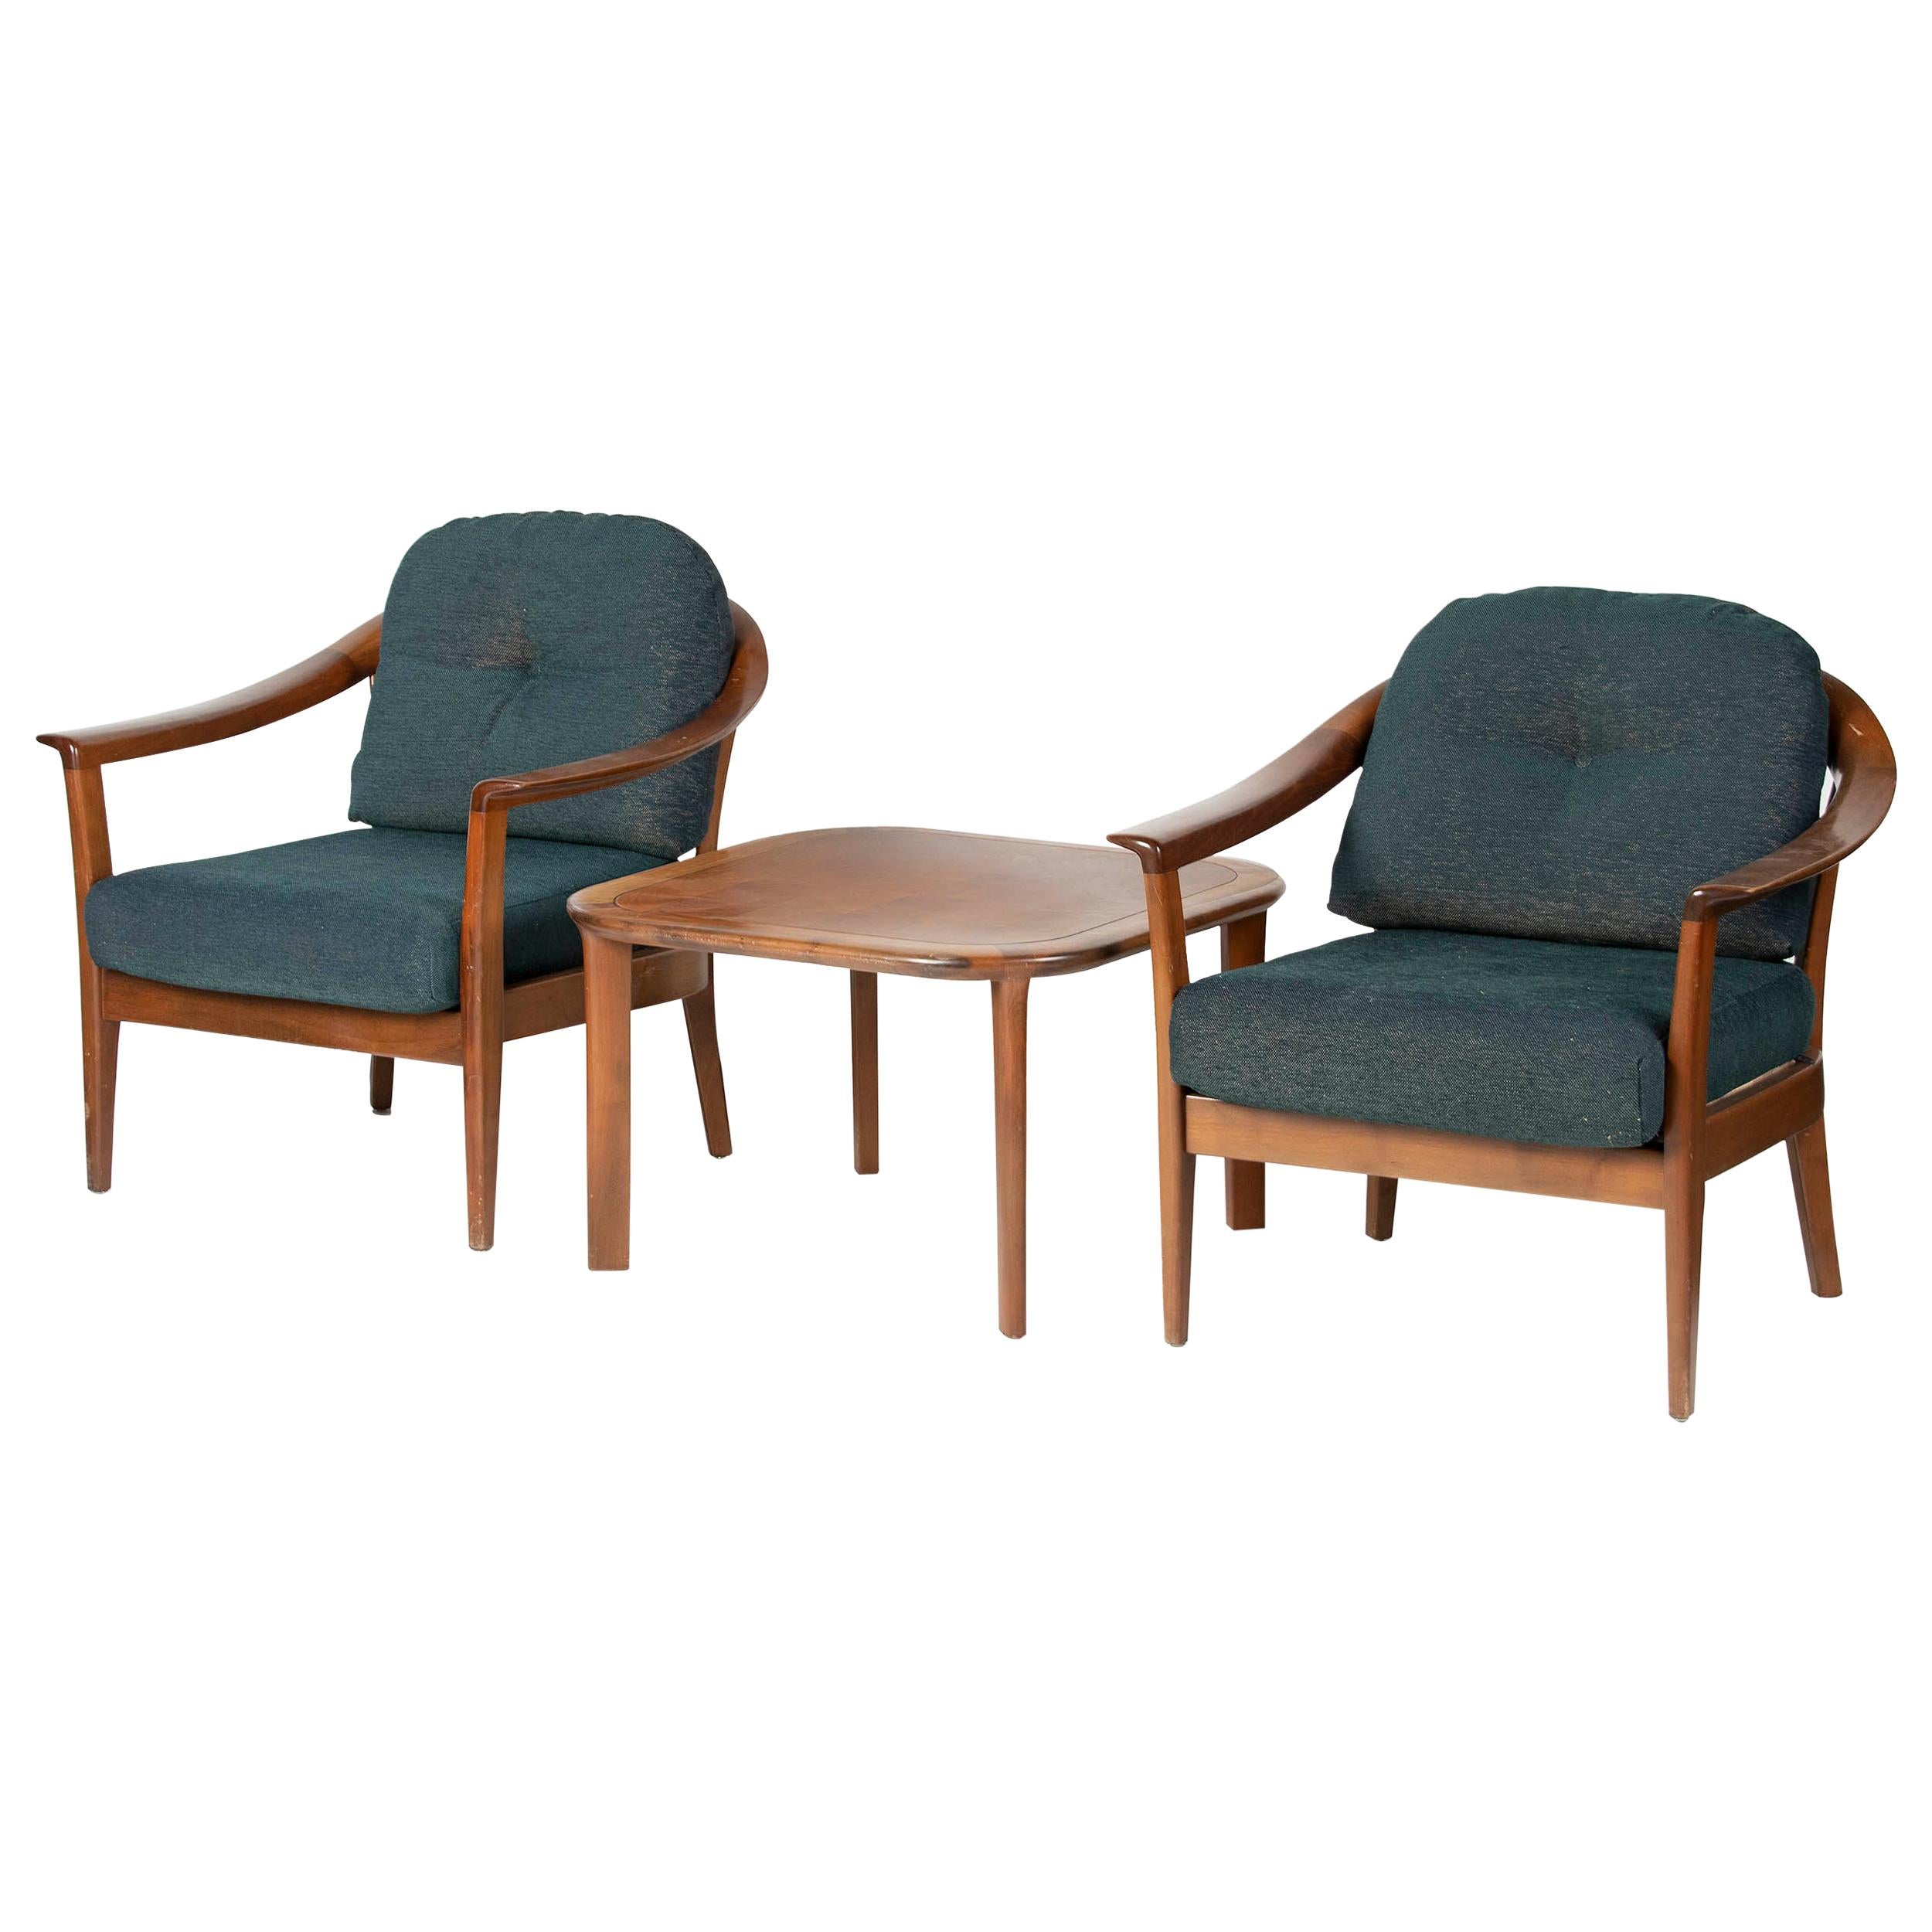 vloot kool Herrie Two Cherrywood Easy Chairs with Sidetable made by Wilhelm Knoll Mid-20th  Century For Sale at 1stDibs